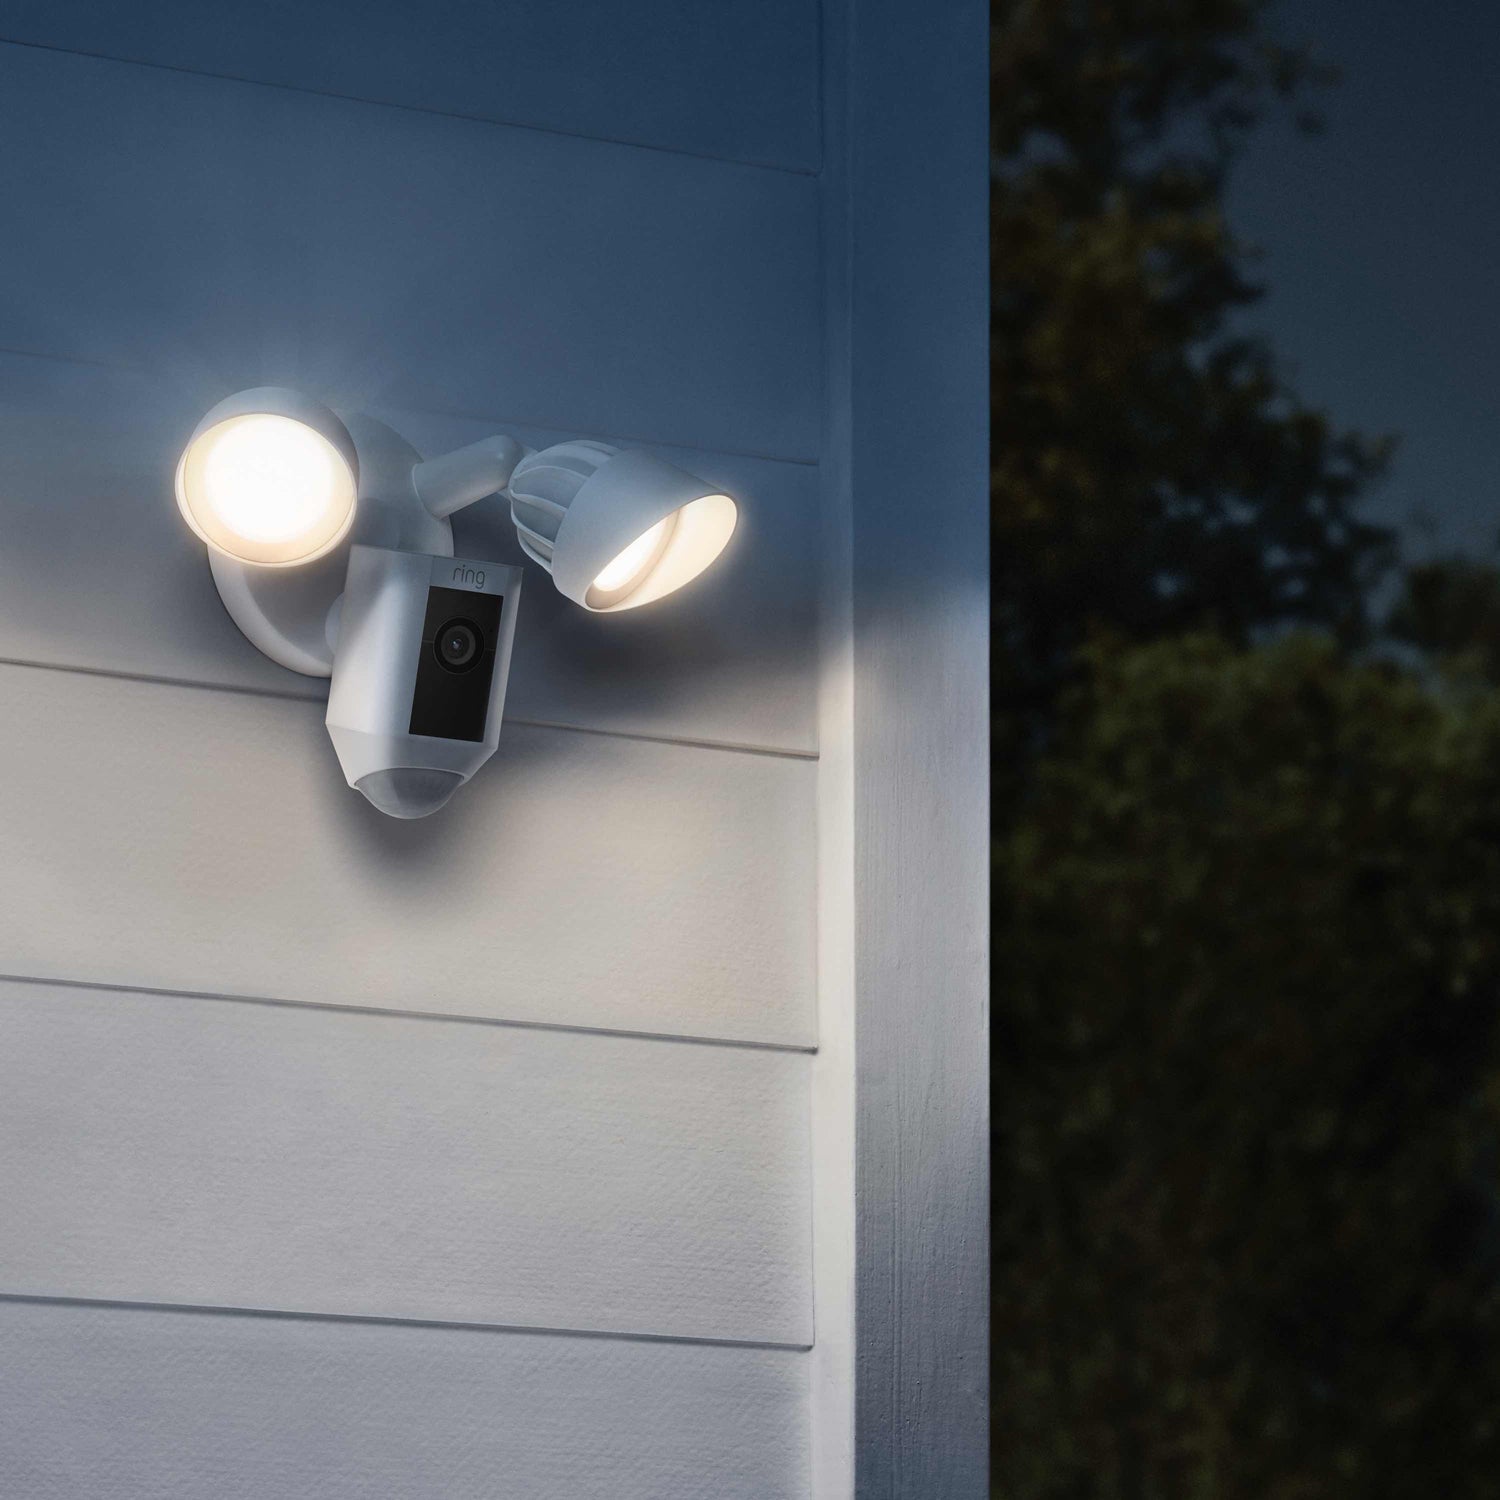 Floodlight Cam Plus (Wired) - Floodlight Cam Wired Plus mounted on exterior corner of home with floodlights on.